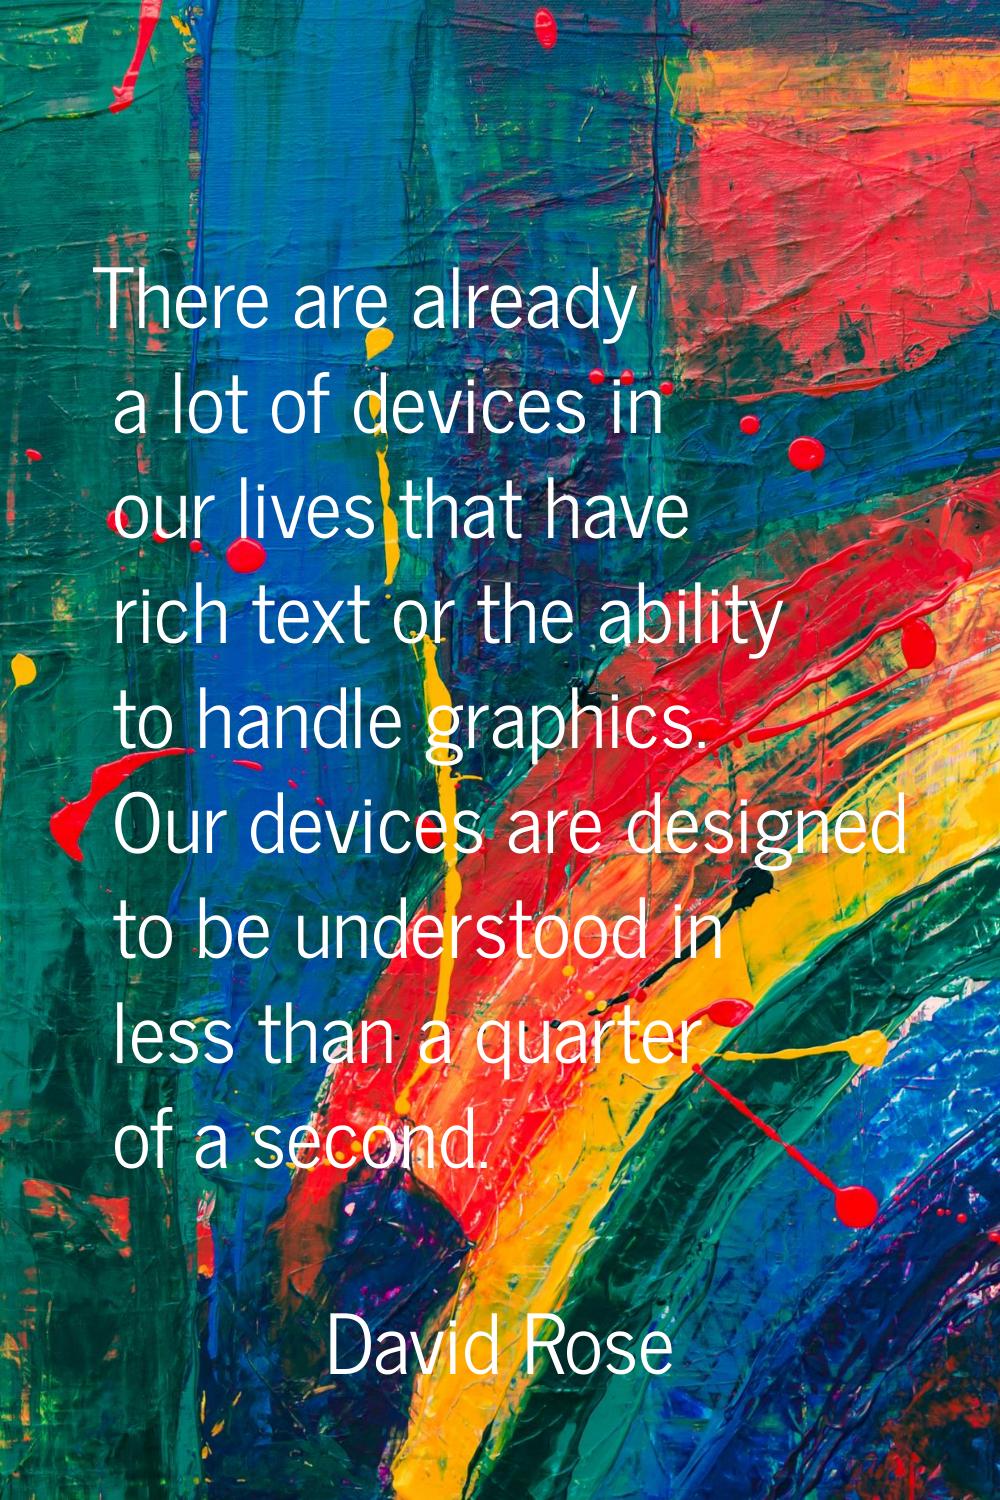 There are already a lot of devices in our lives that have rich text or the ability to handle graphi